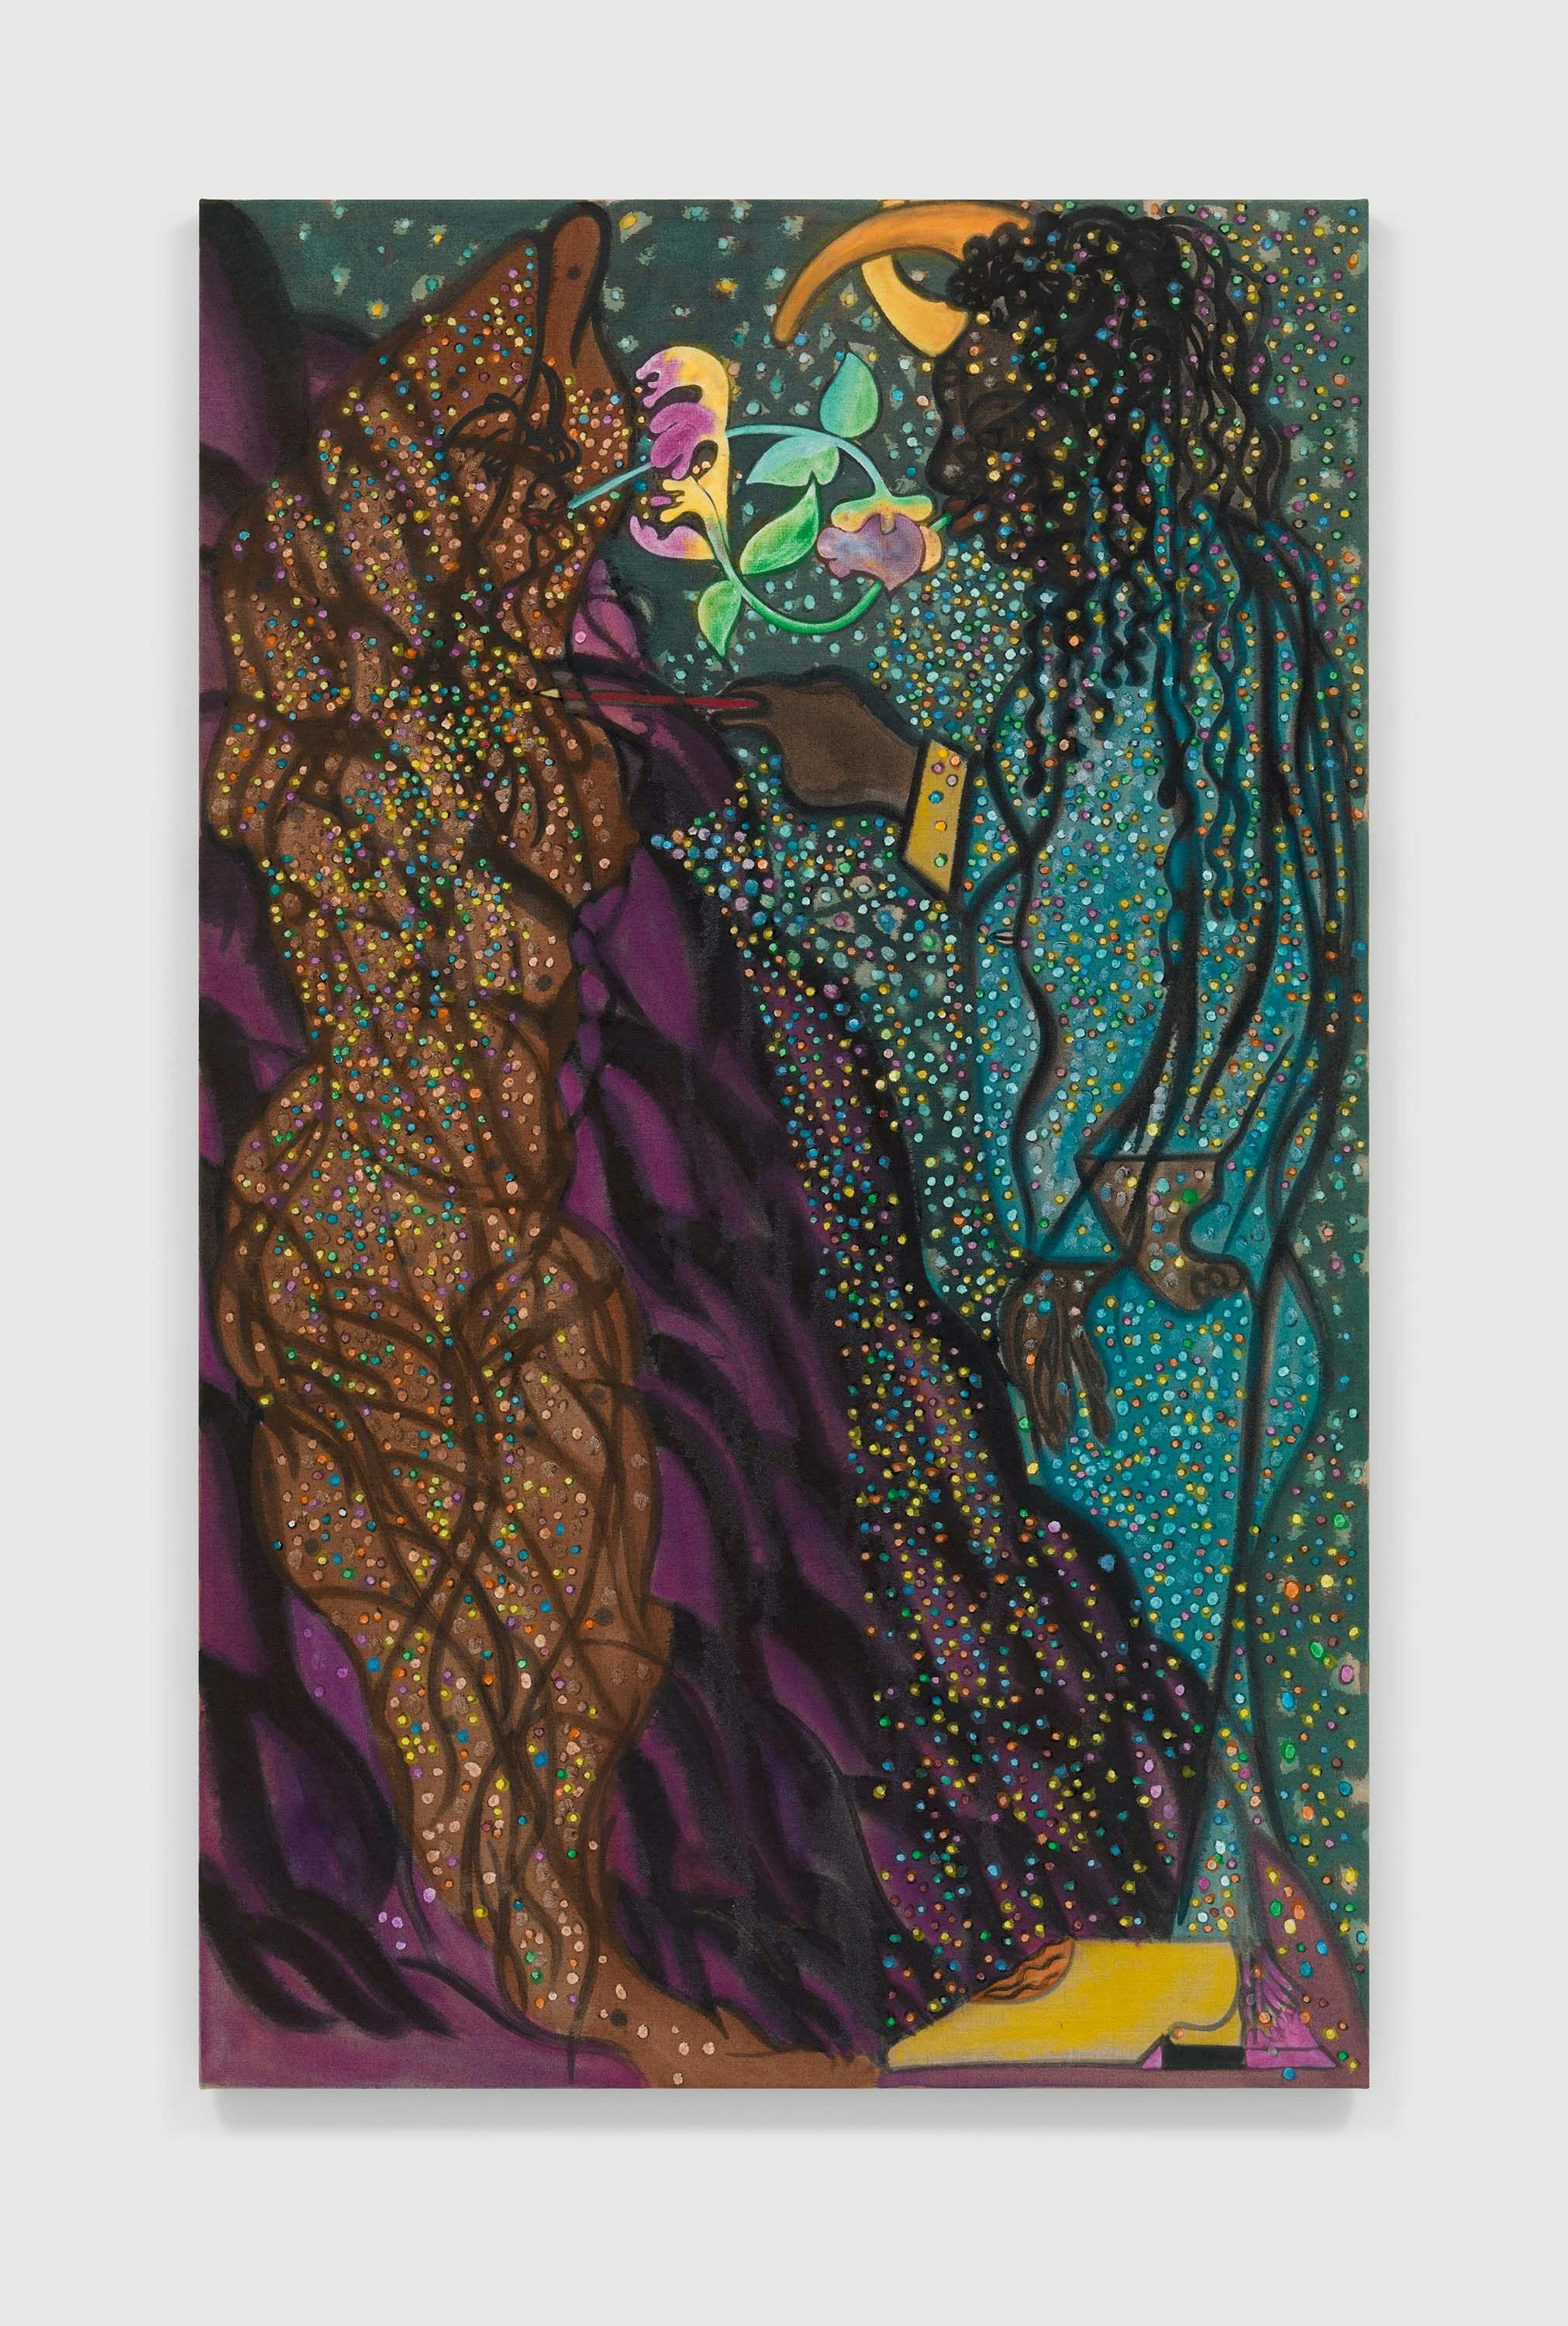 An oil and charcoal on linen painting by Chris Ofili, titled Waterfall - artist & muse (after Boscoe Holder), dated 2022.